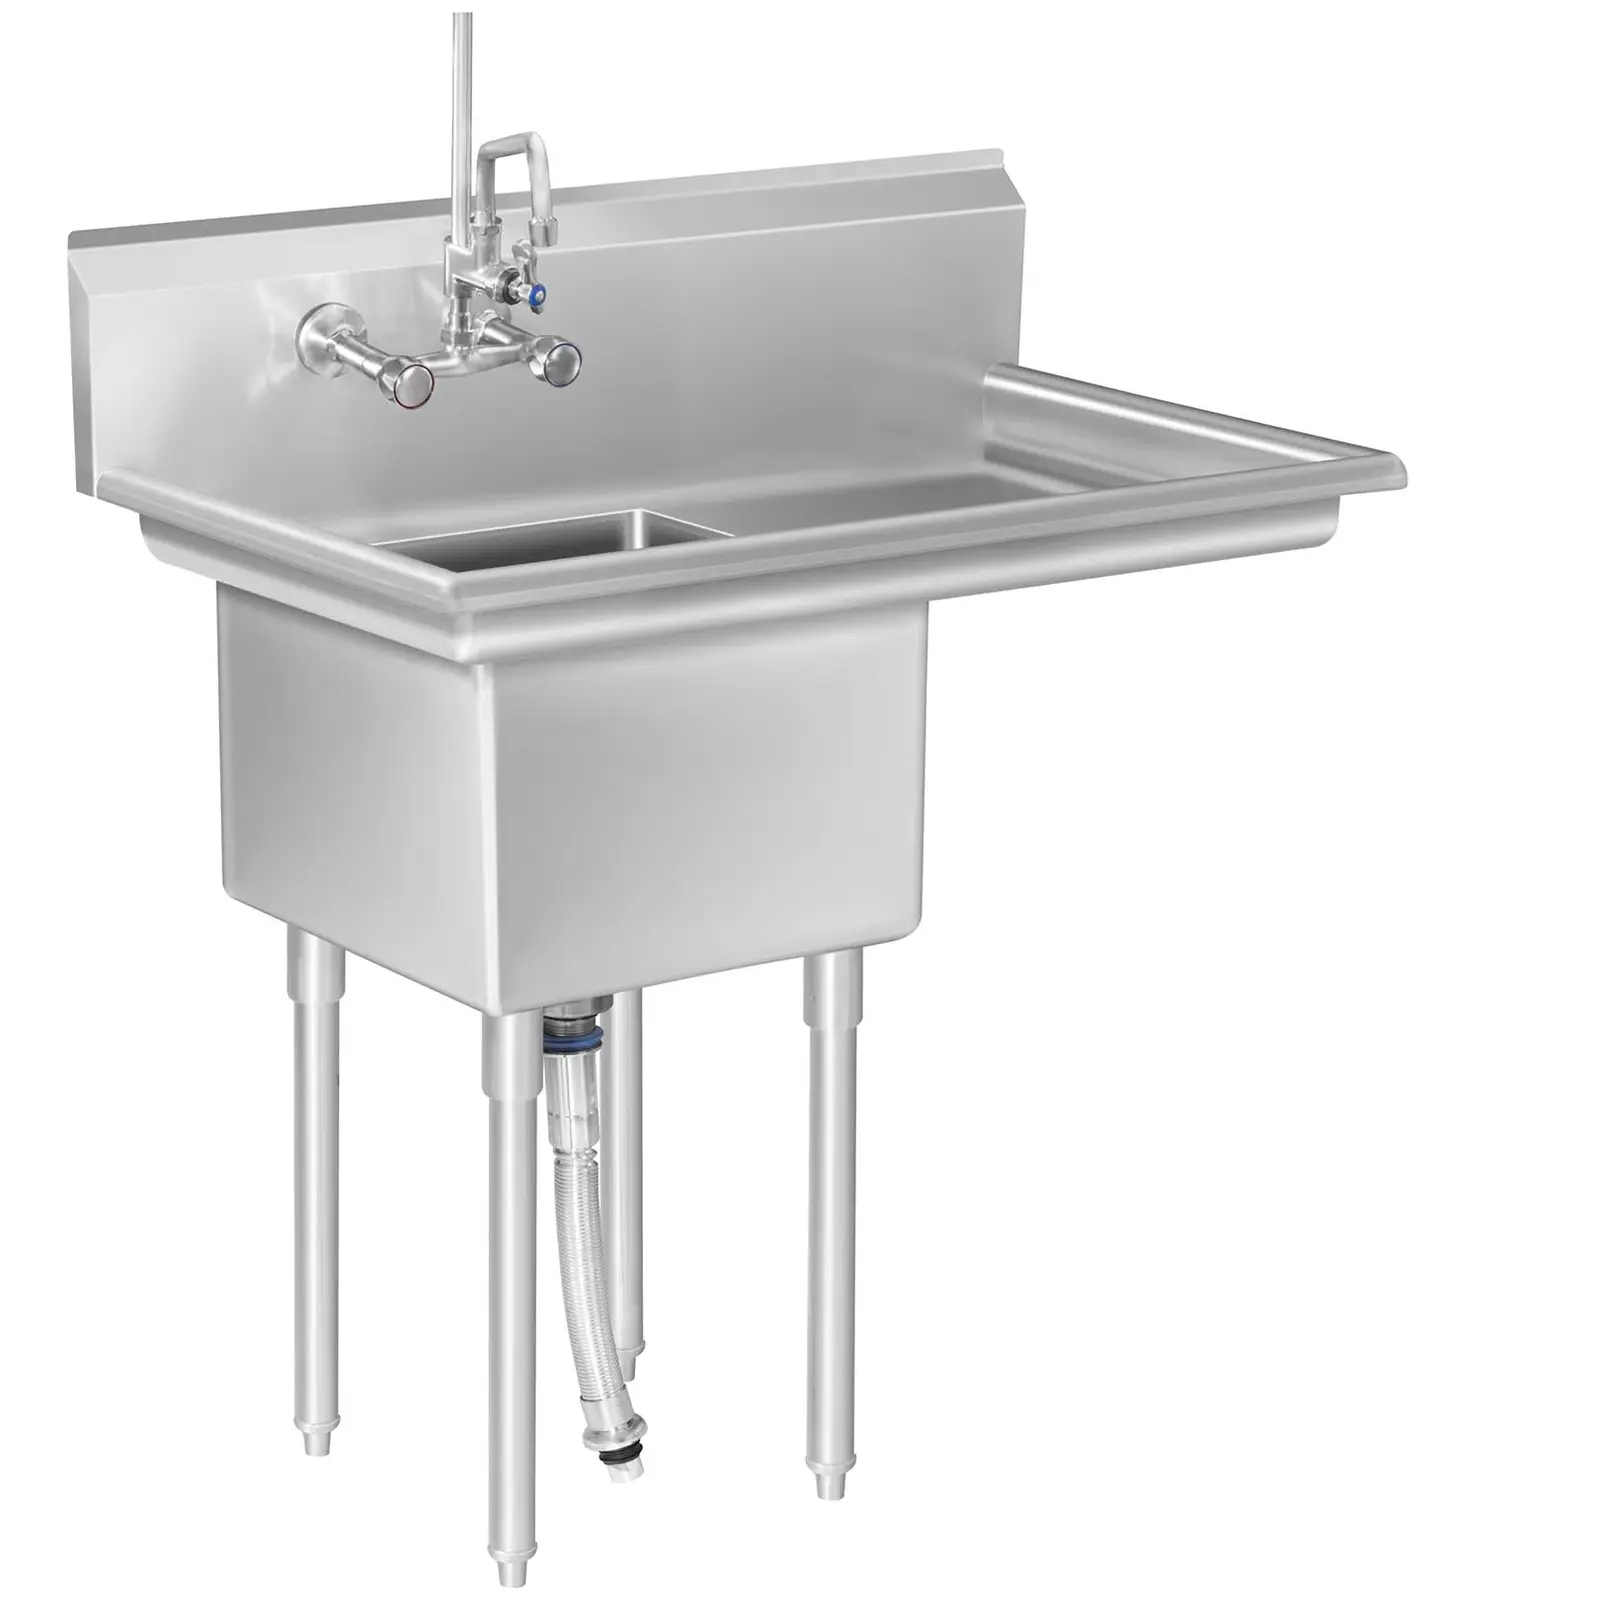 Commercial Sink – 1 Compartment and Right sided drainage area